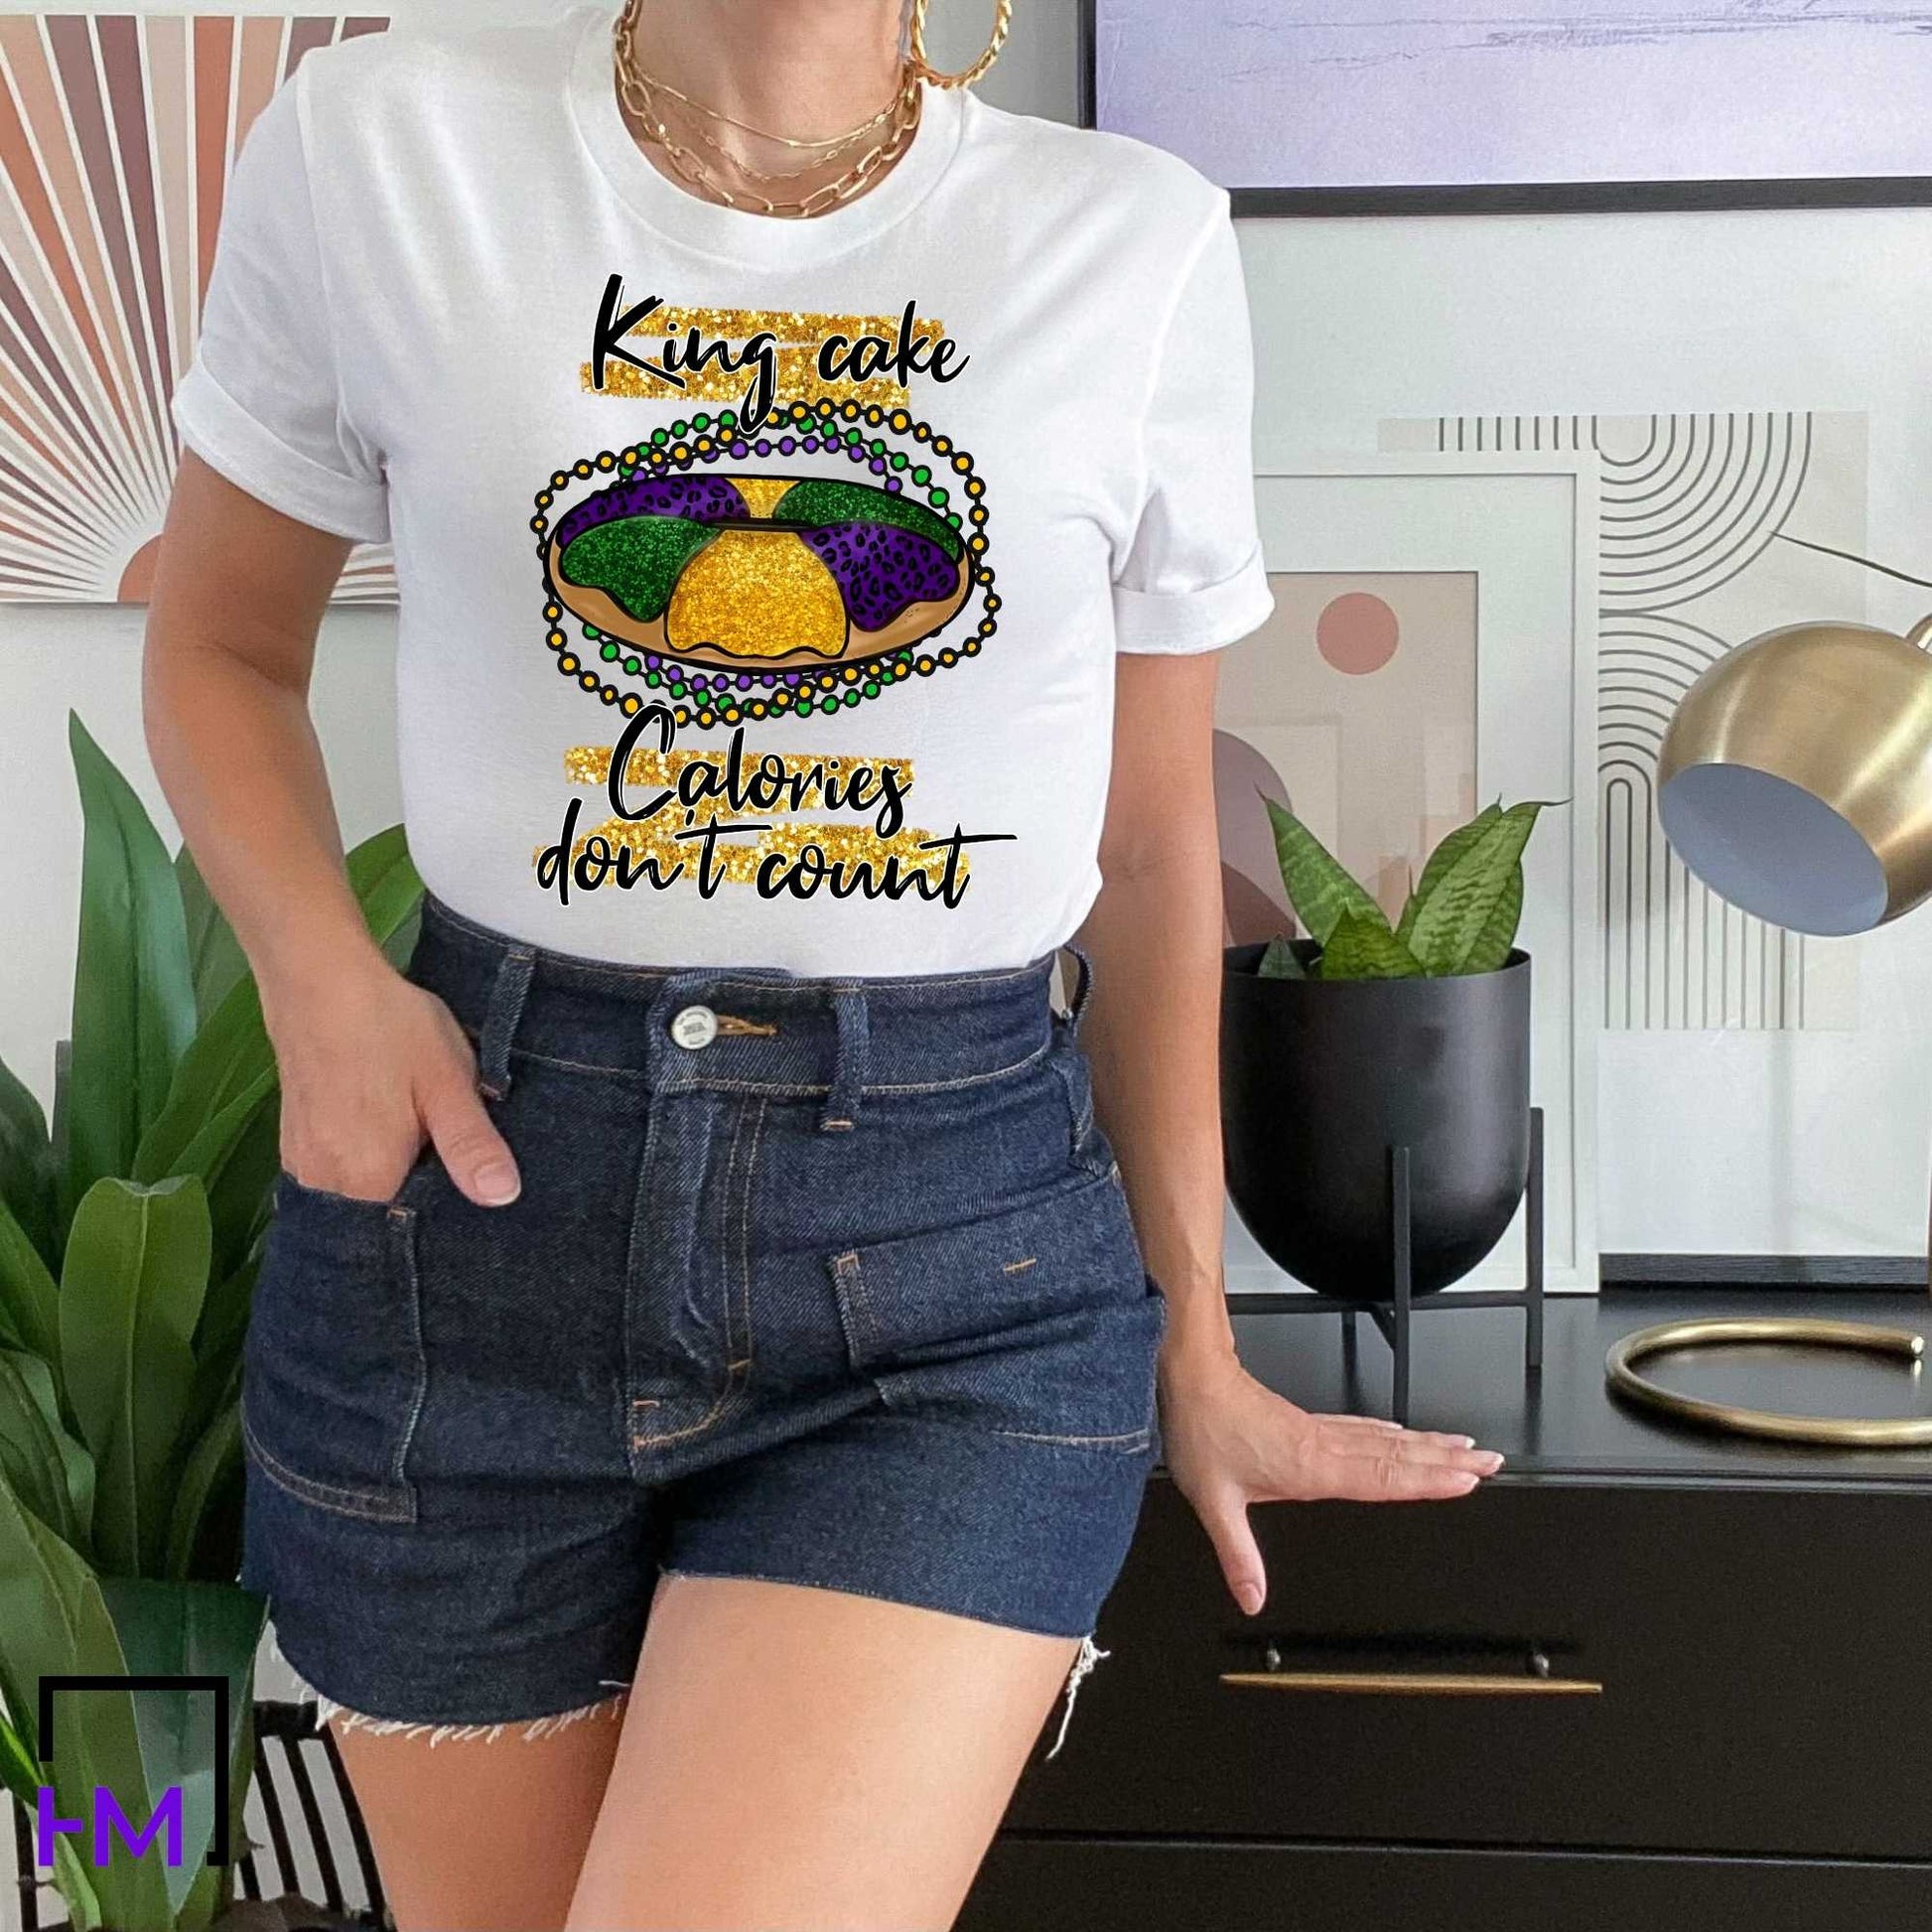 King Cake Mardi Gras Shirt or Tank Top for Women and Men, Plus Sizes Available Up to 5XL